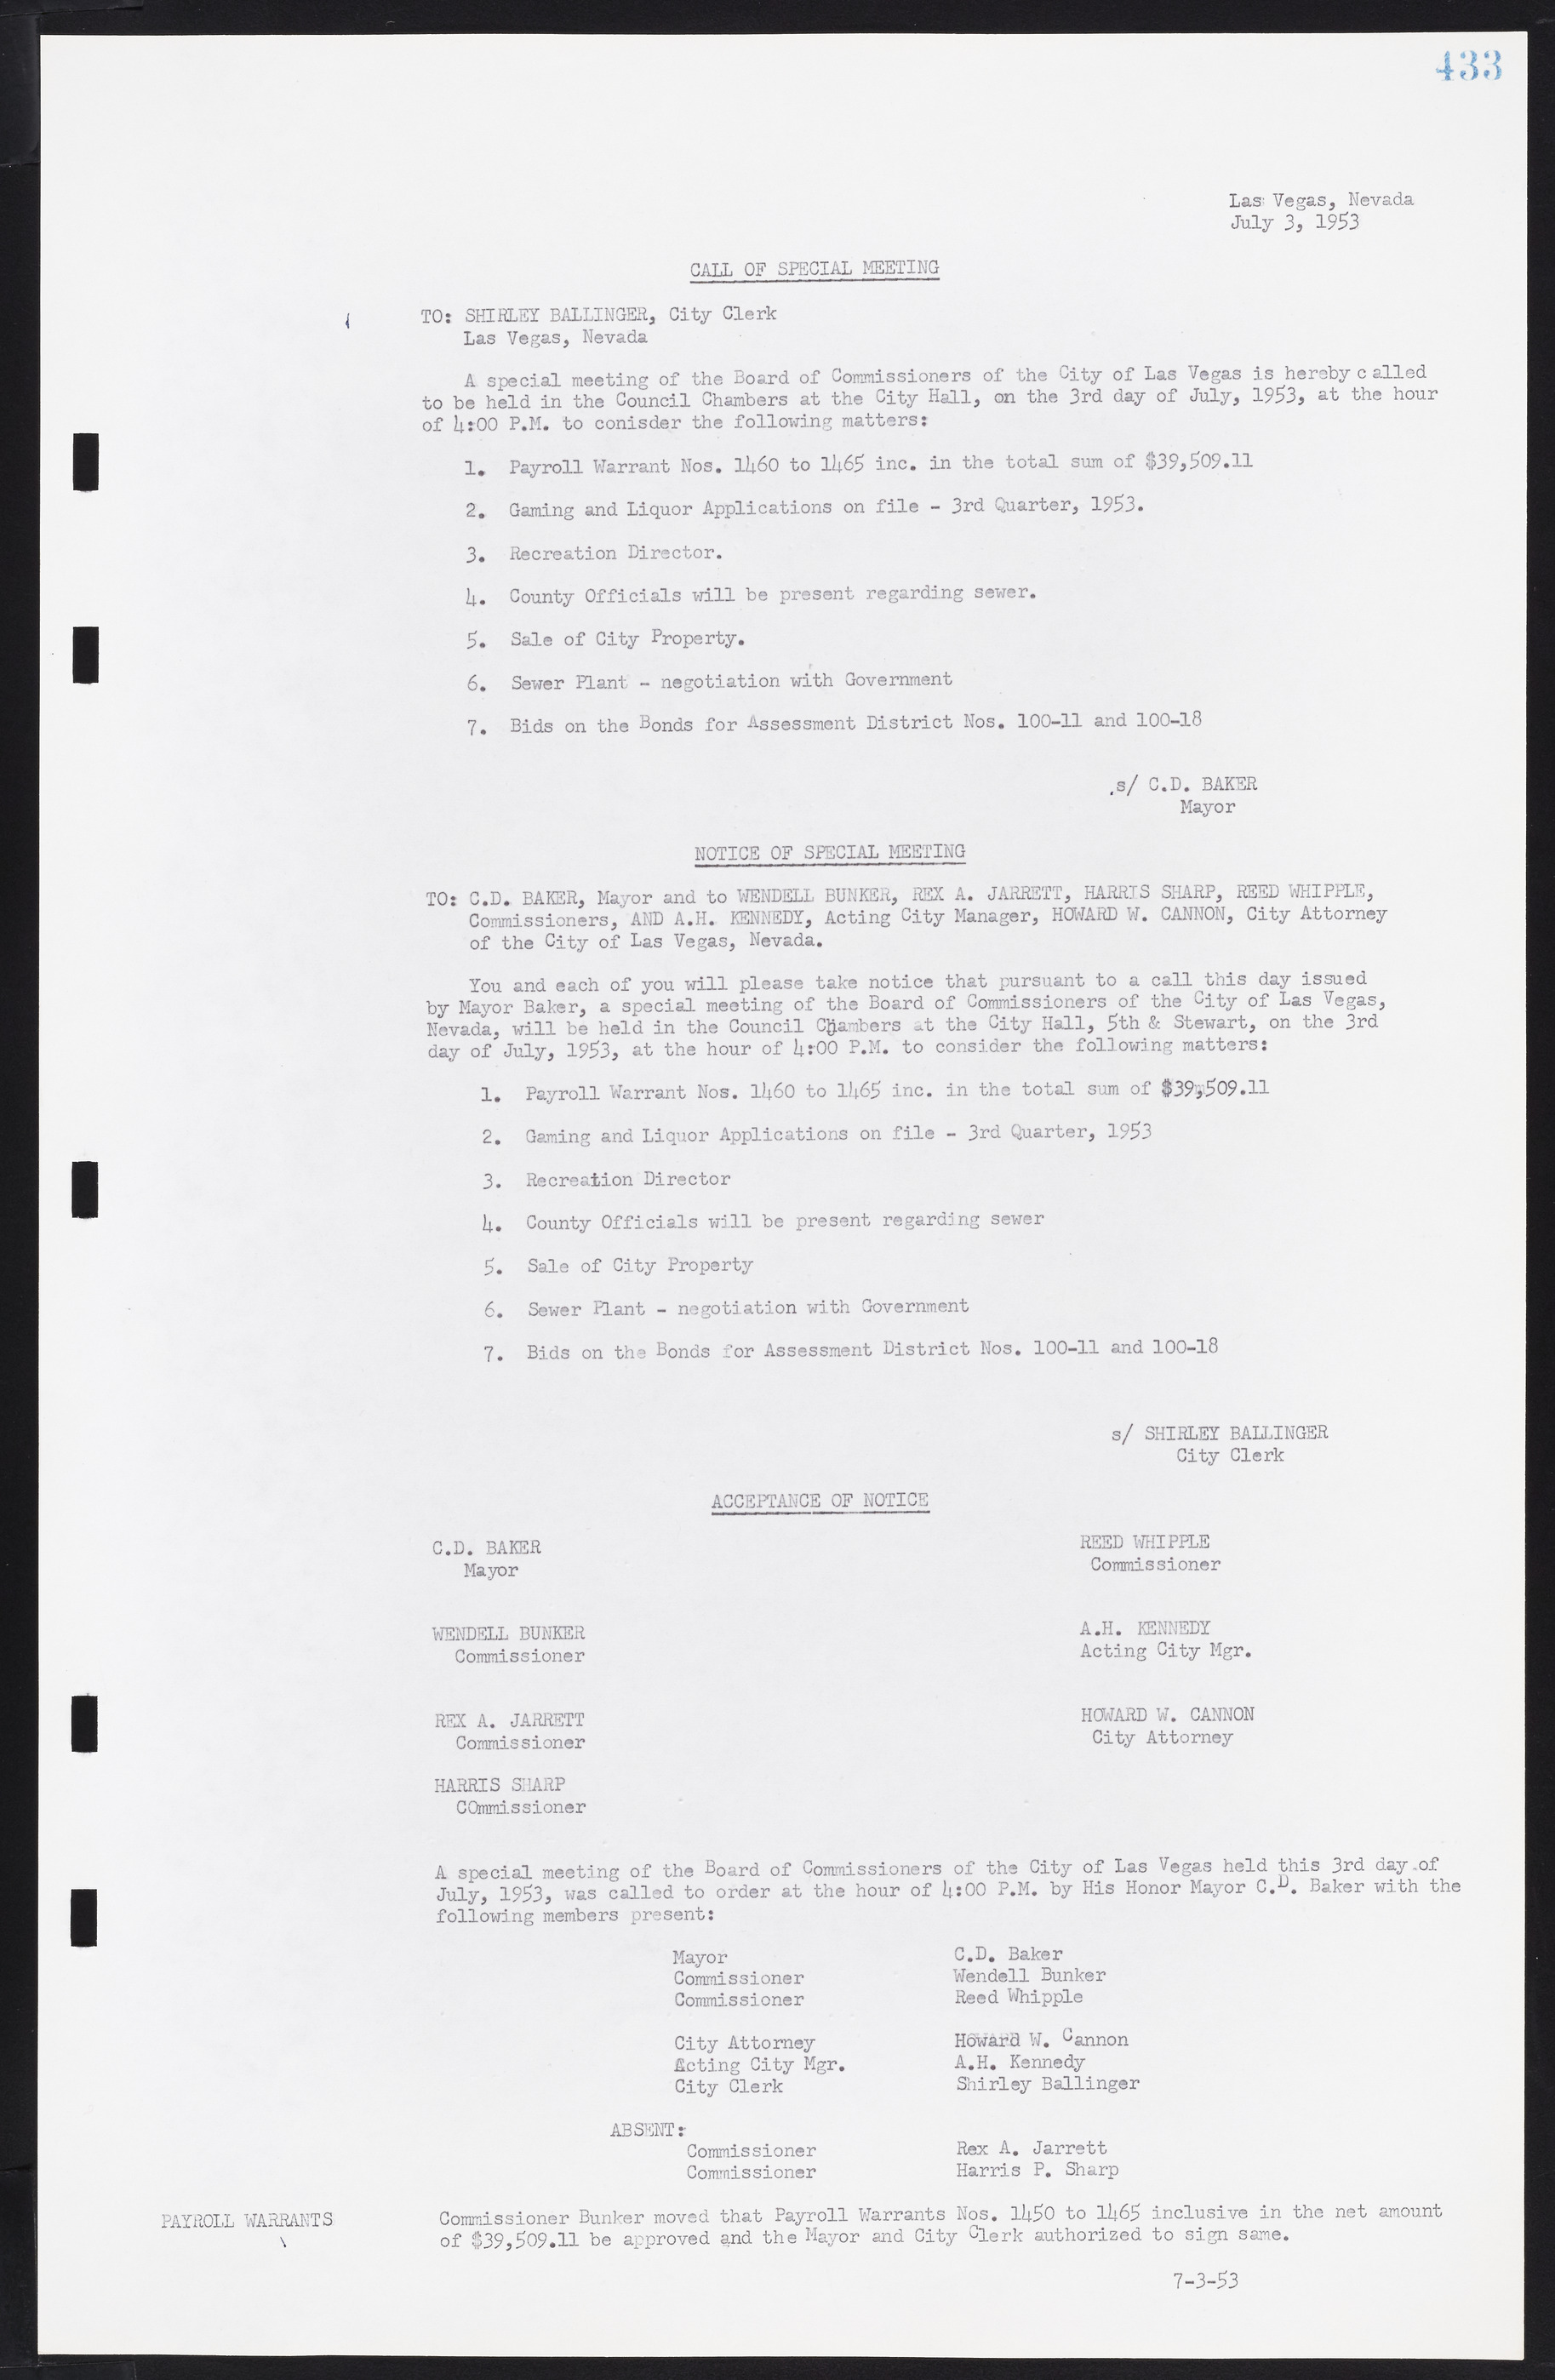 Las Vegas City Commission Minutes, May 26, 1952 to February 17, 1954, lvc000008-463